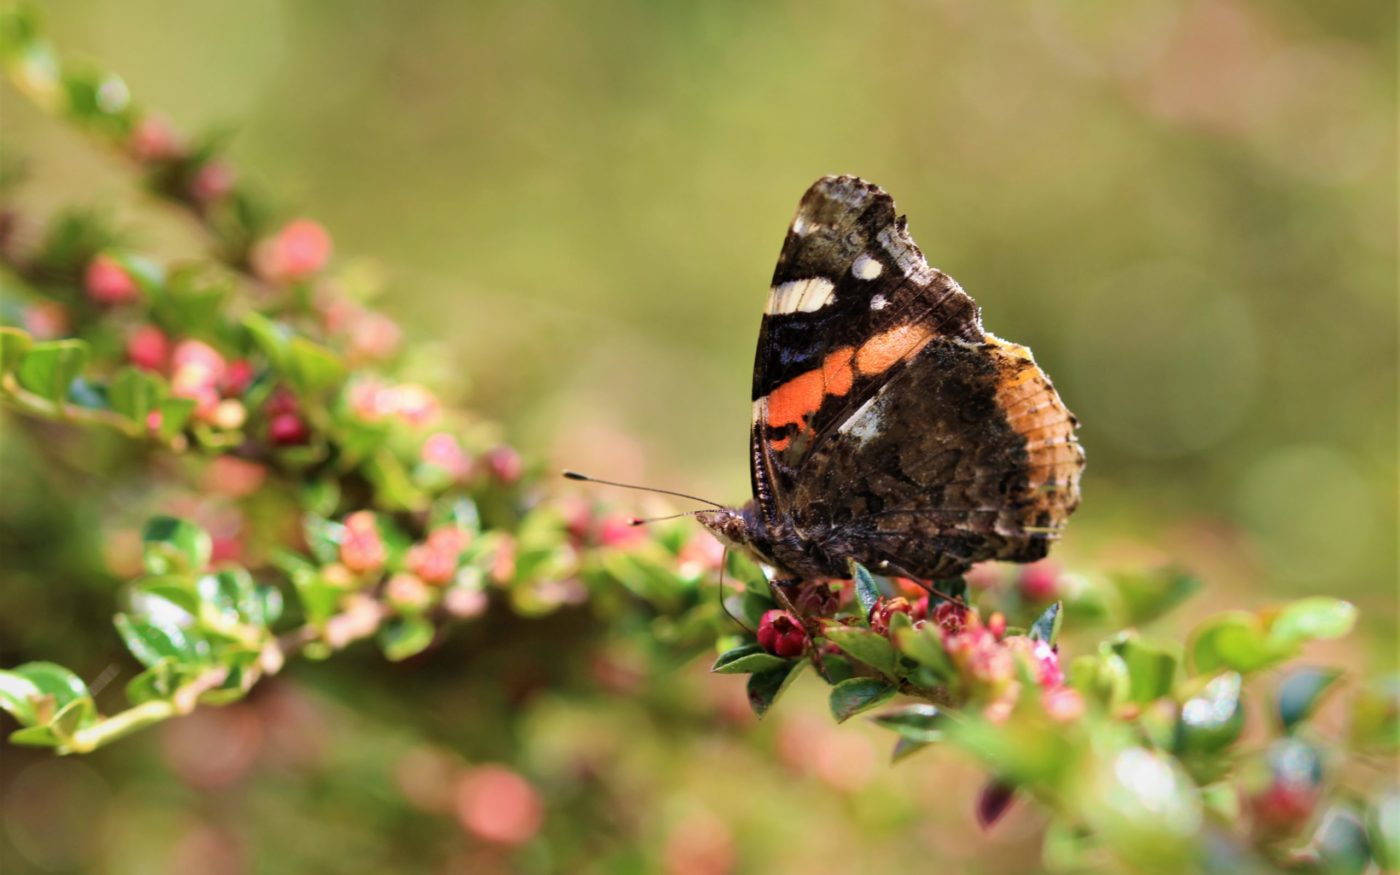 Red Admiral butterfly, Vanessa atalanta, on a green and pink plant